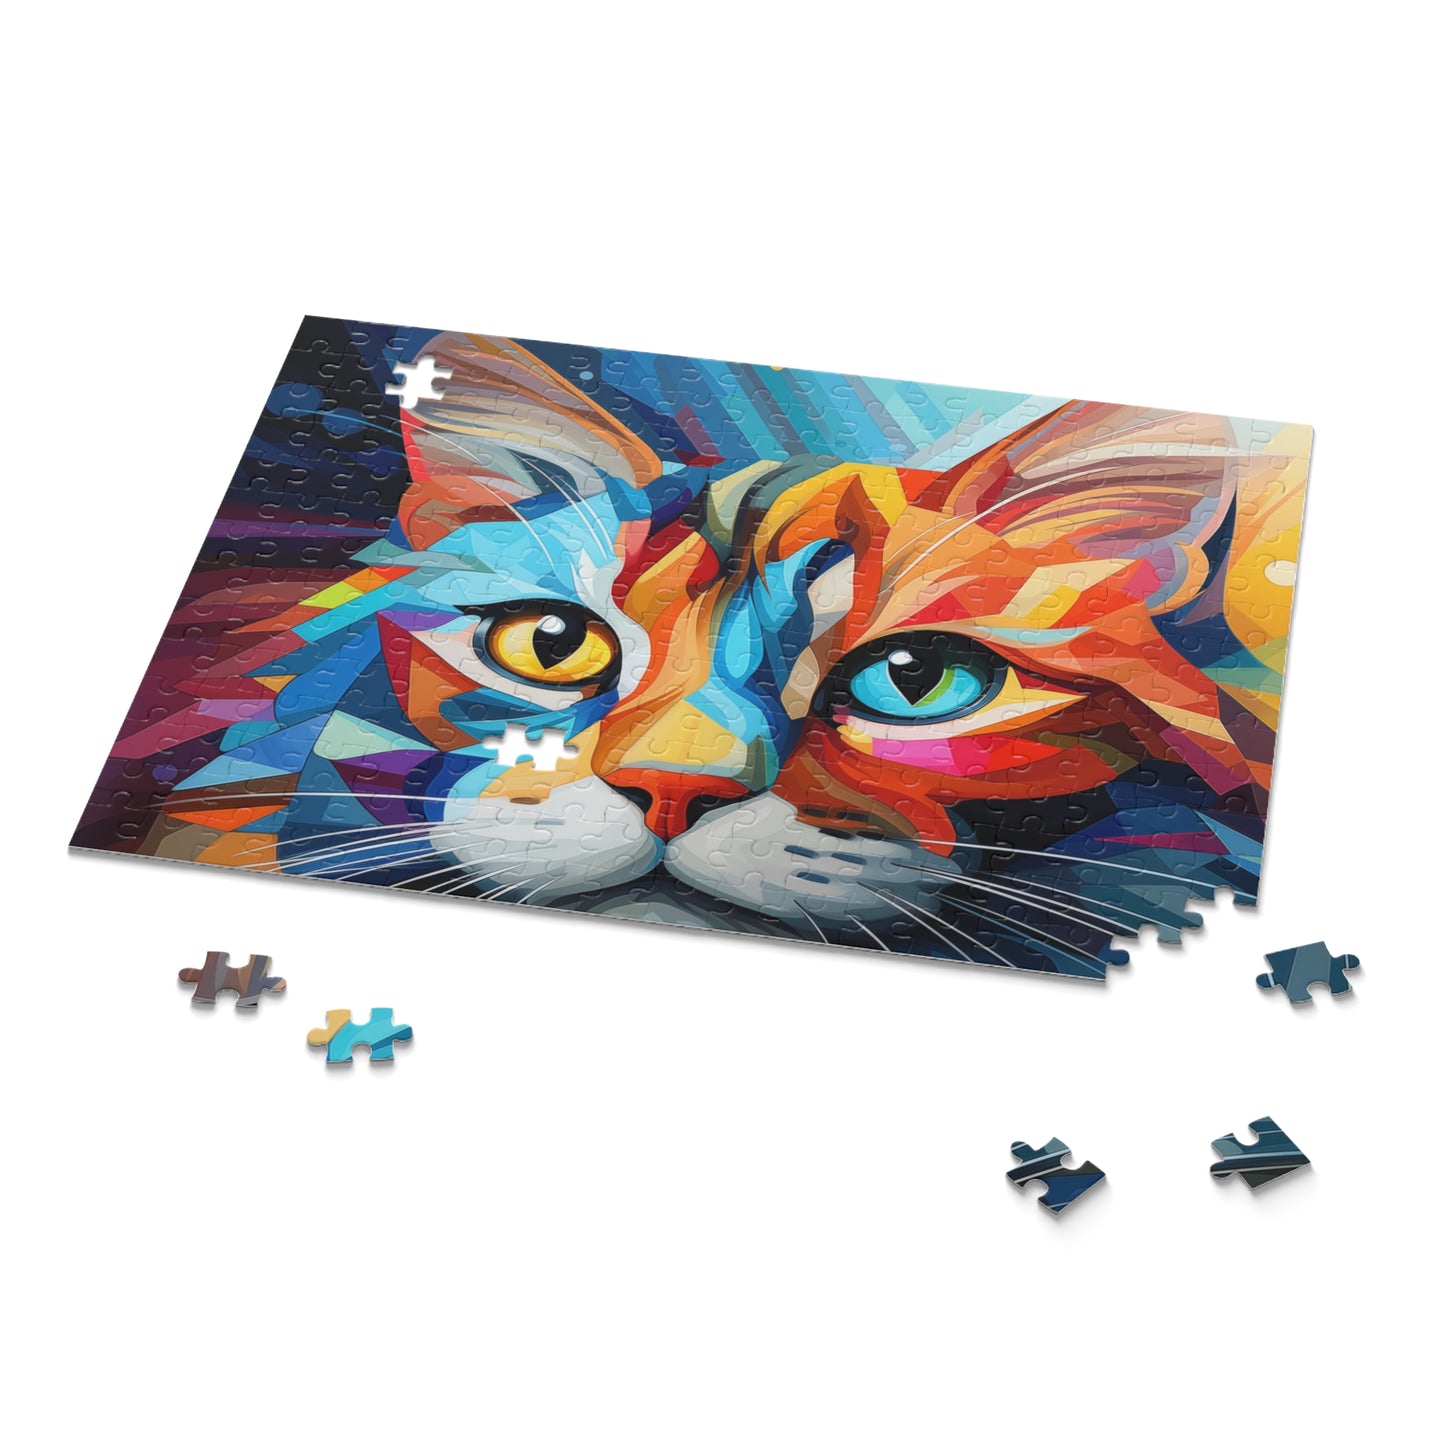 Abstract Oil Paint Colorful Cat Jigsaw Puzzle Adult Birthday Business Jigsaw Puzzle Gift for Him Funny Humorous Indoor Outdoor Game Gift For Her Online-9